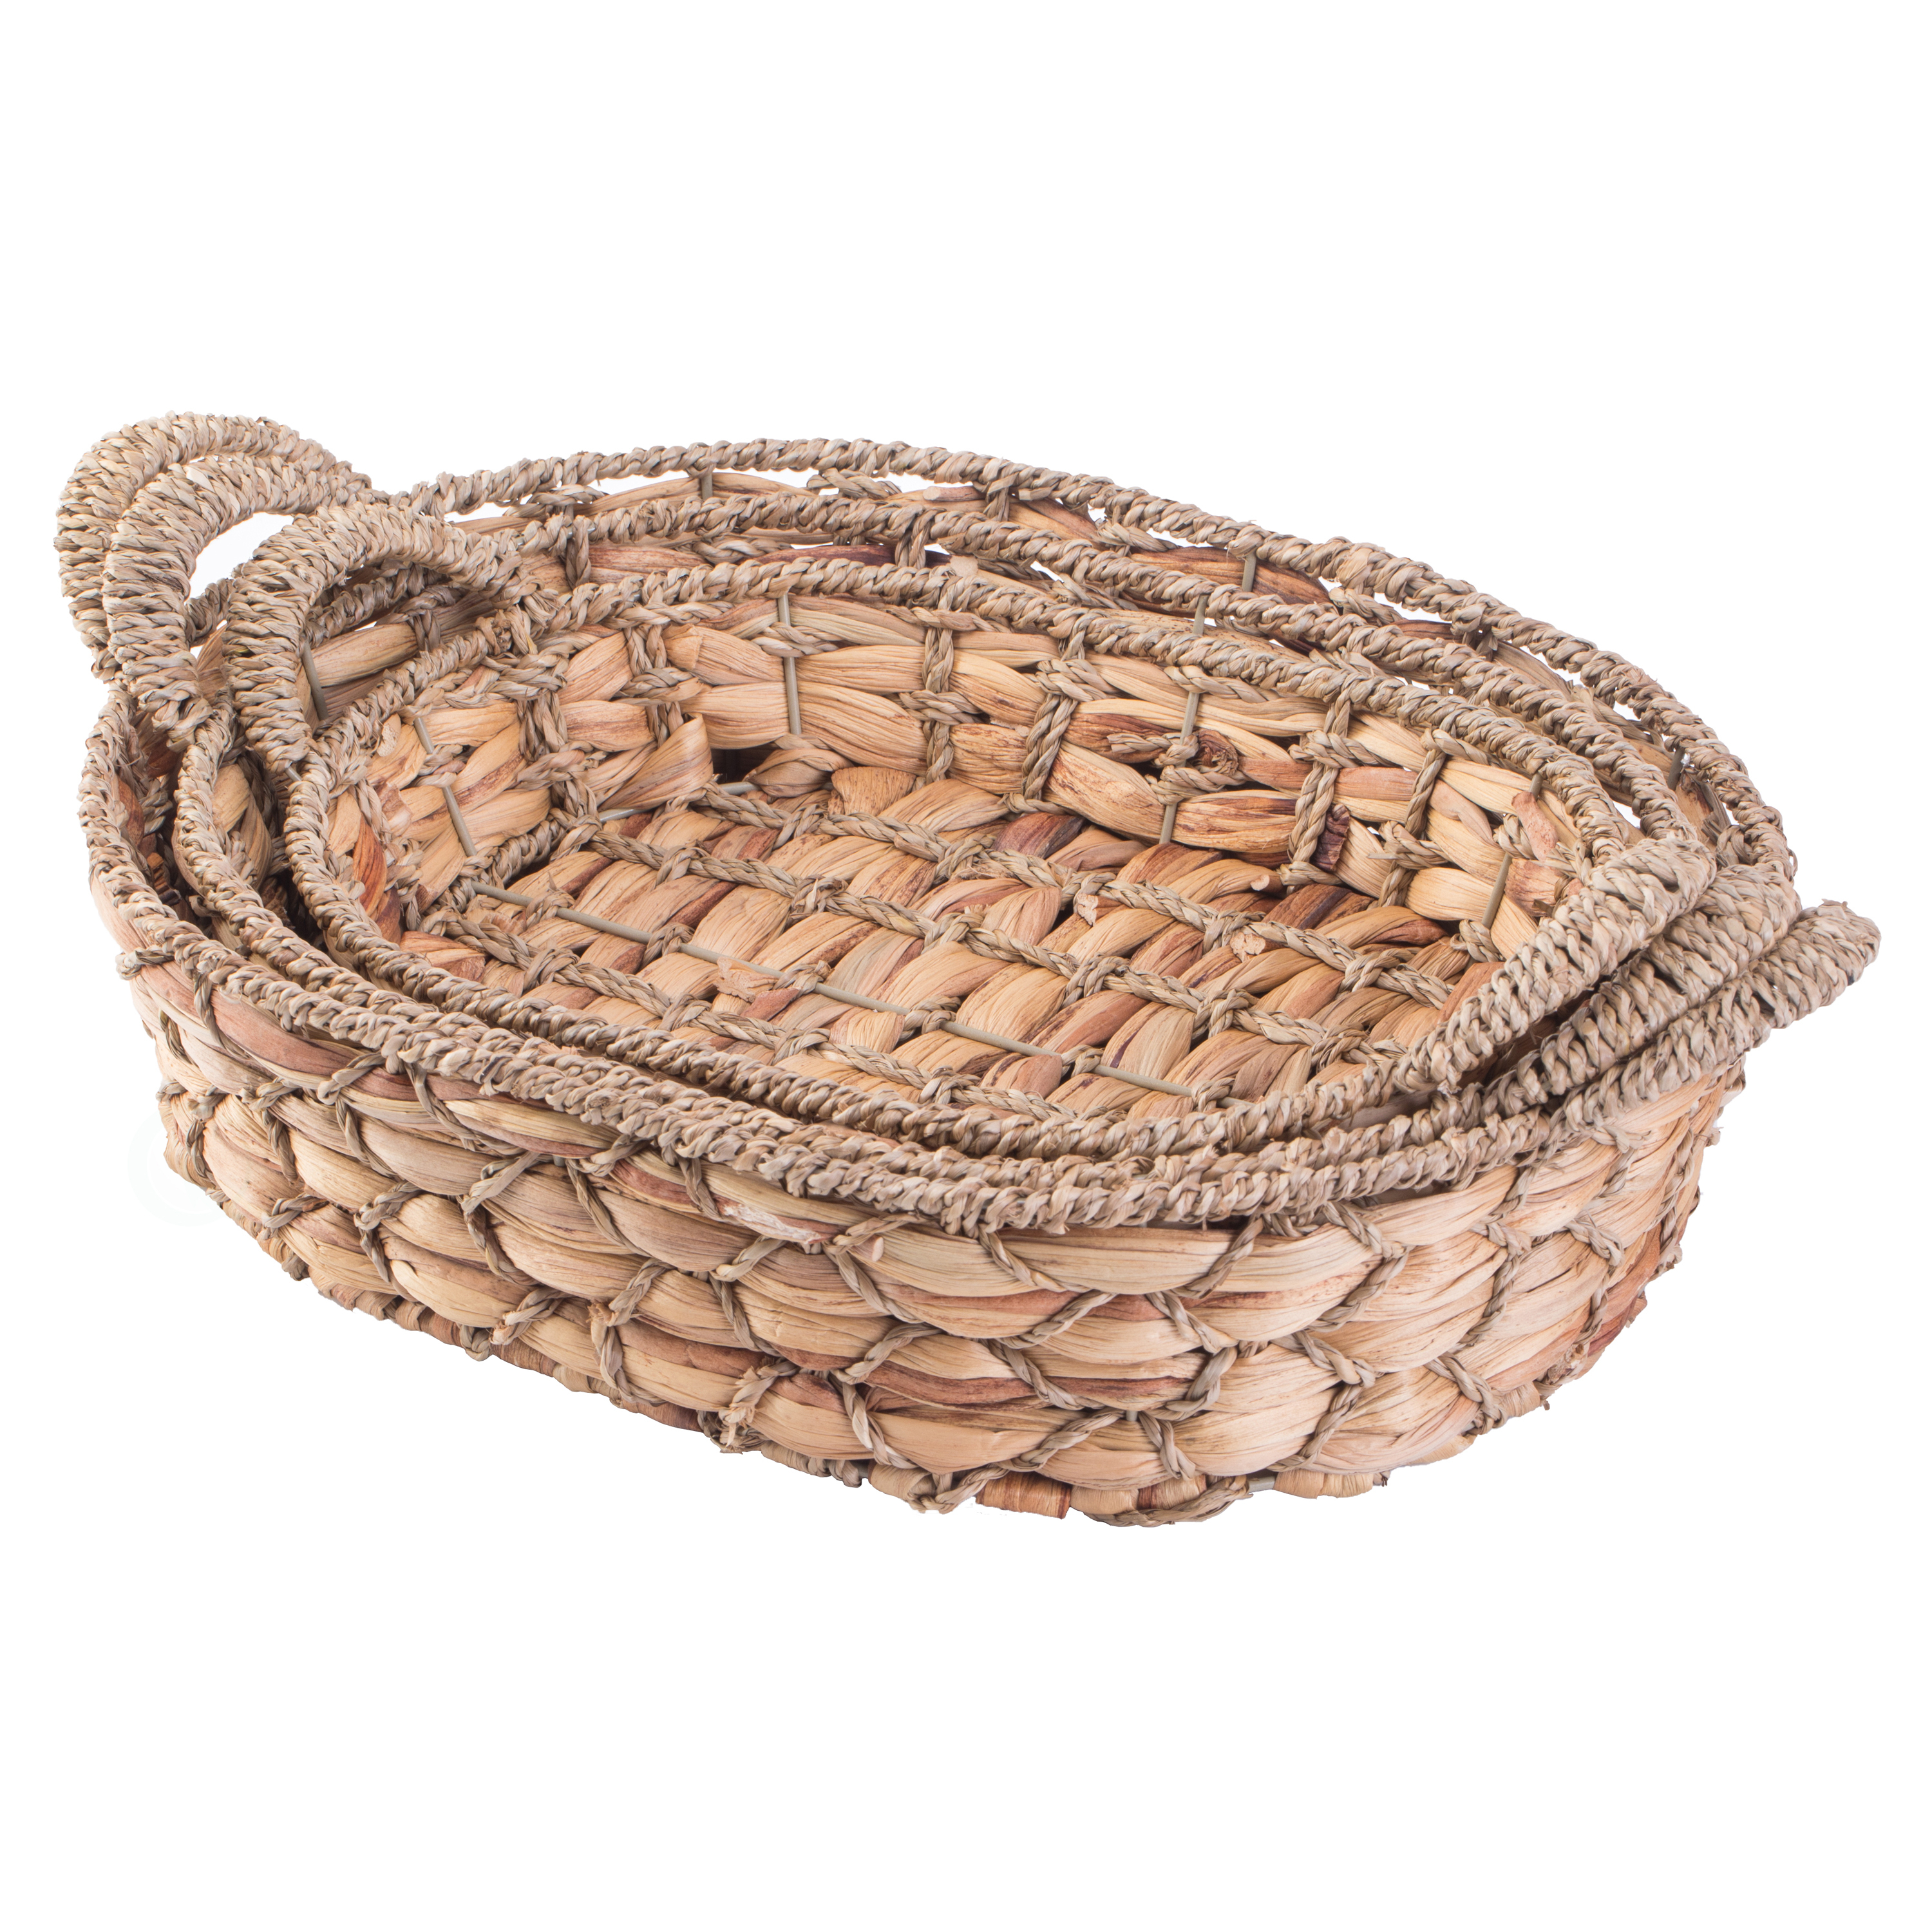 Seagrass Fruit Bread Basket Tray With Handles - Medium